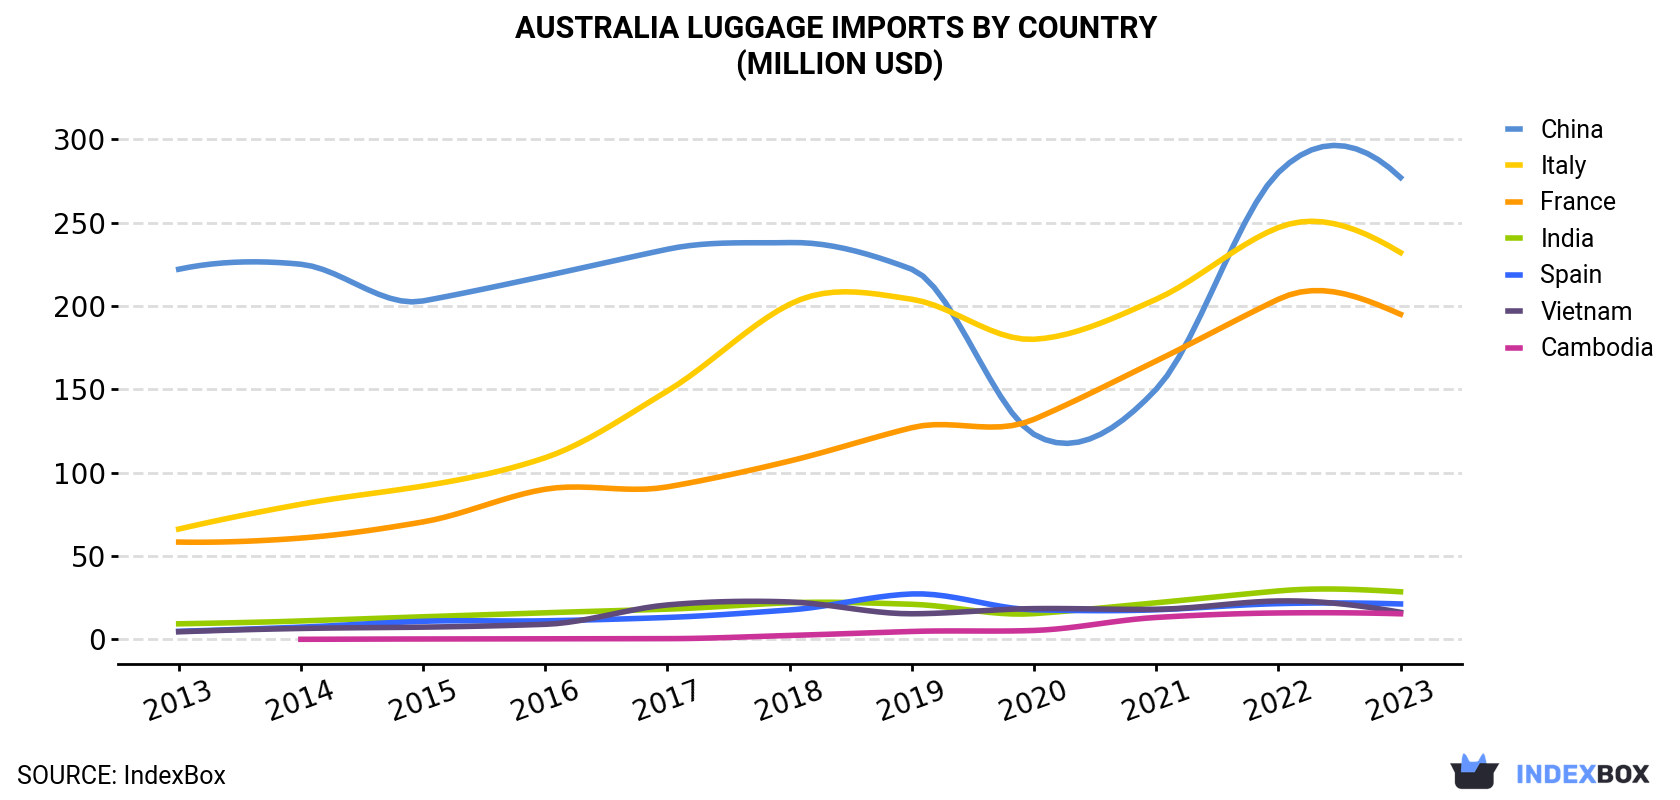 Australia Luggage Imports By Country (Million USD)